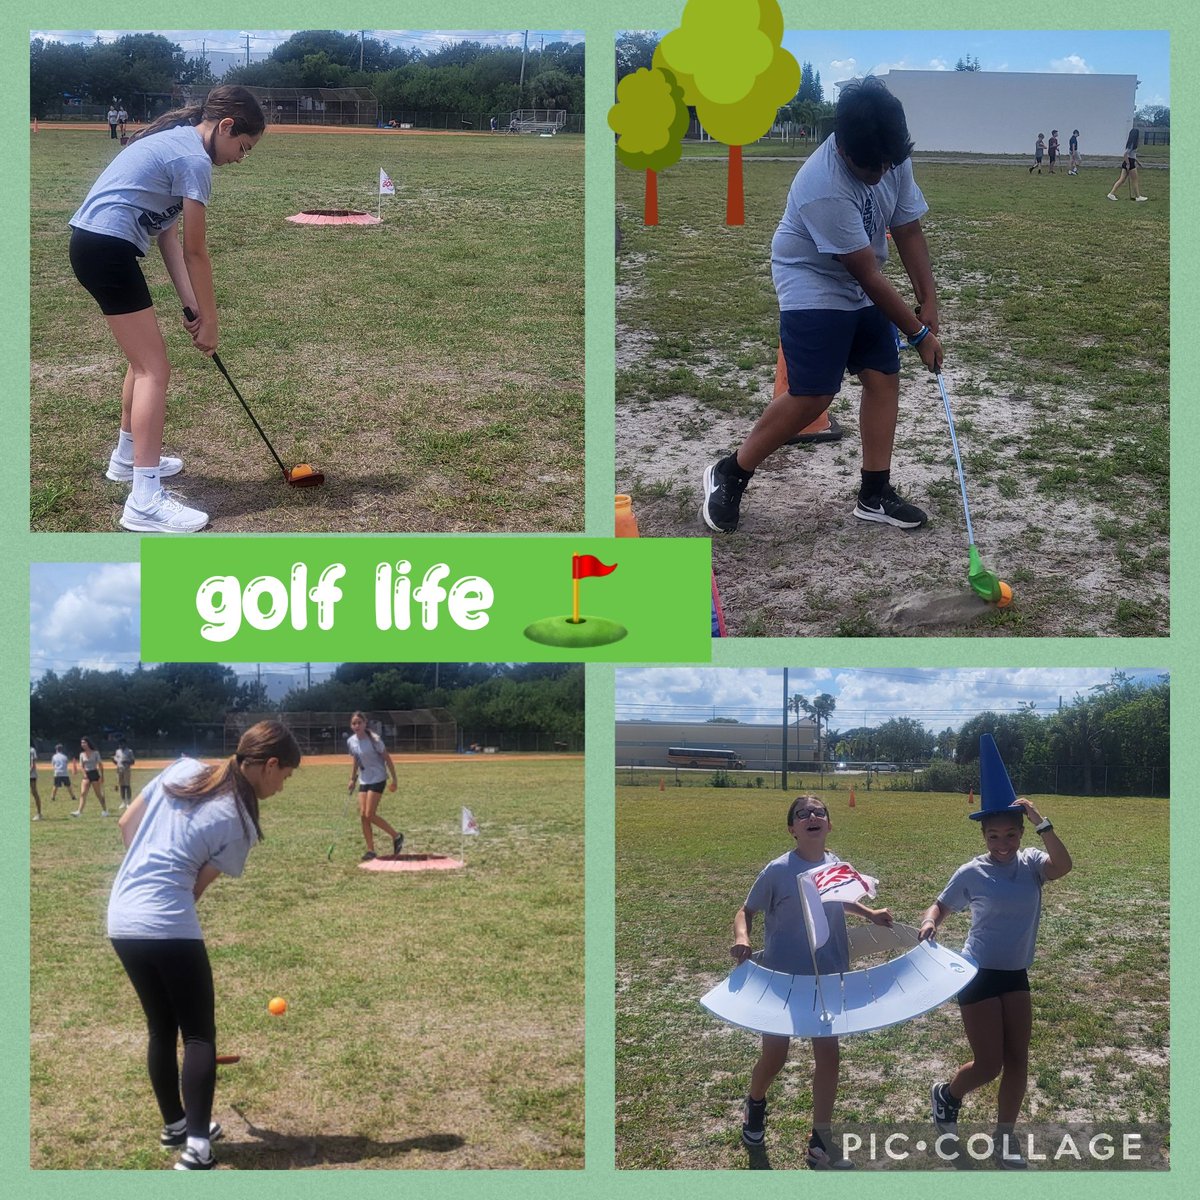 Par, birdies, eagles, bogeys, and holes-in-one...6th grade completed Volcano Golf this week. Ss kept score on our 11-volcano course. (The iguanas on the fields made for some interesting hazards). @CmmsMedia @CMMSPrincipal @ericsternPE @KwikGolf #cmmspe #physed #Golf